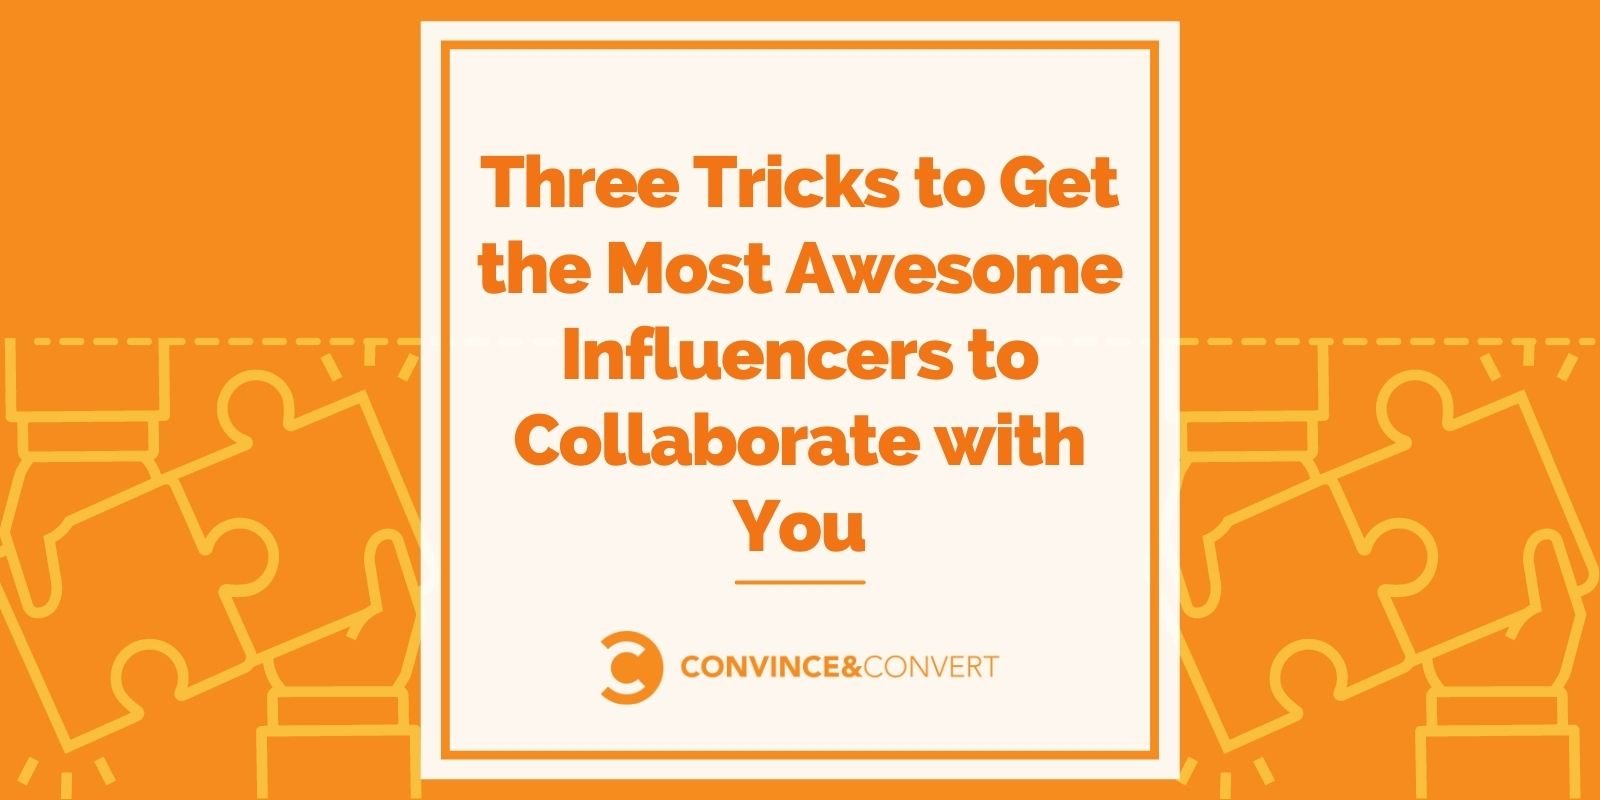 Three Systems to Get the Most Excellent Influencers to Collaborate with You